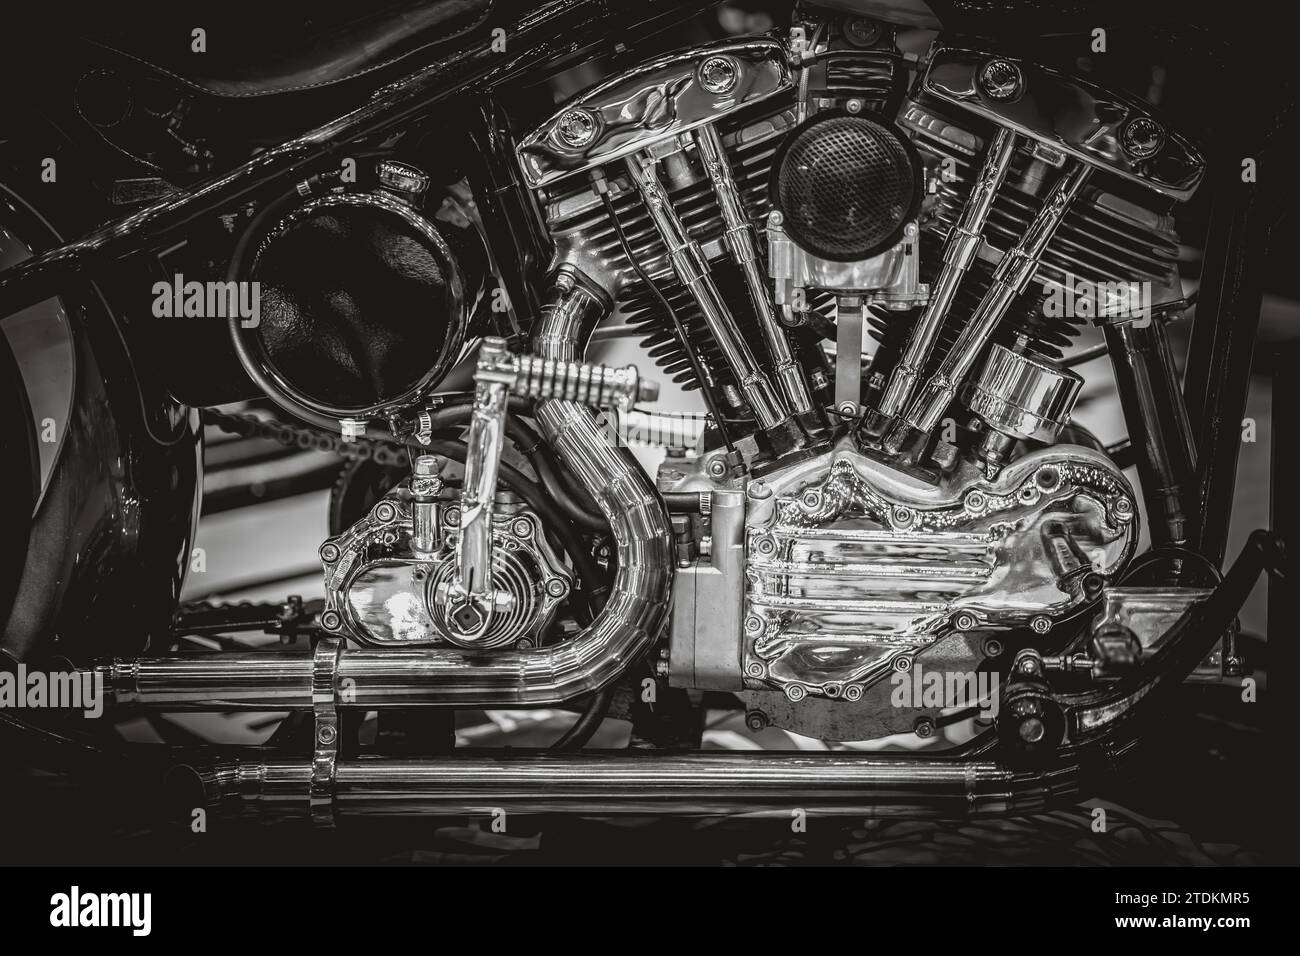 shiny chrome motorcycle engine engine exhaust pipes art photography in black and white vintage tone Stock Photo